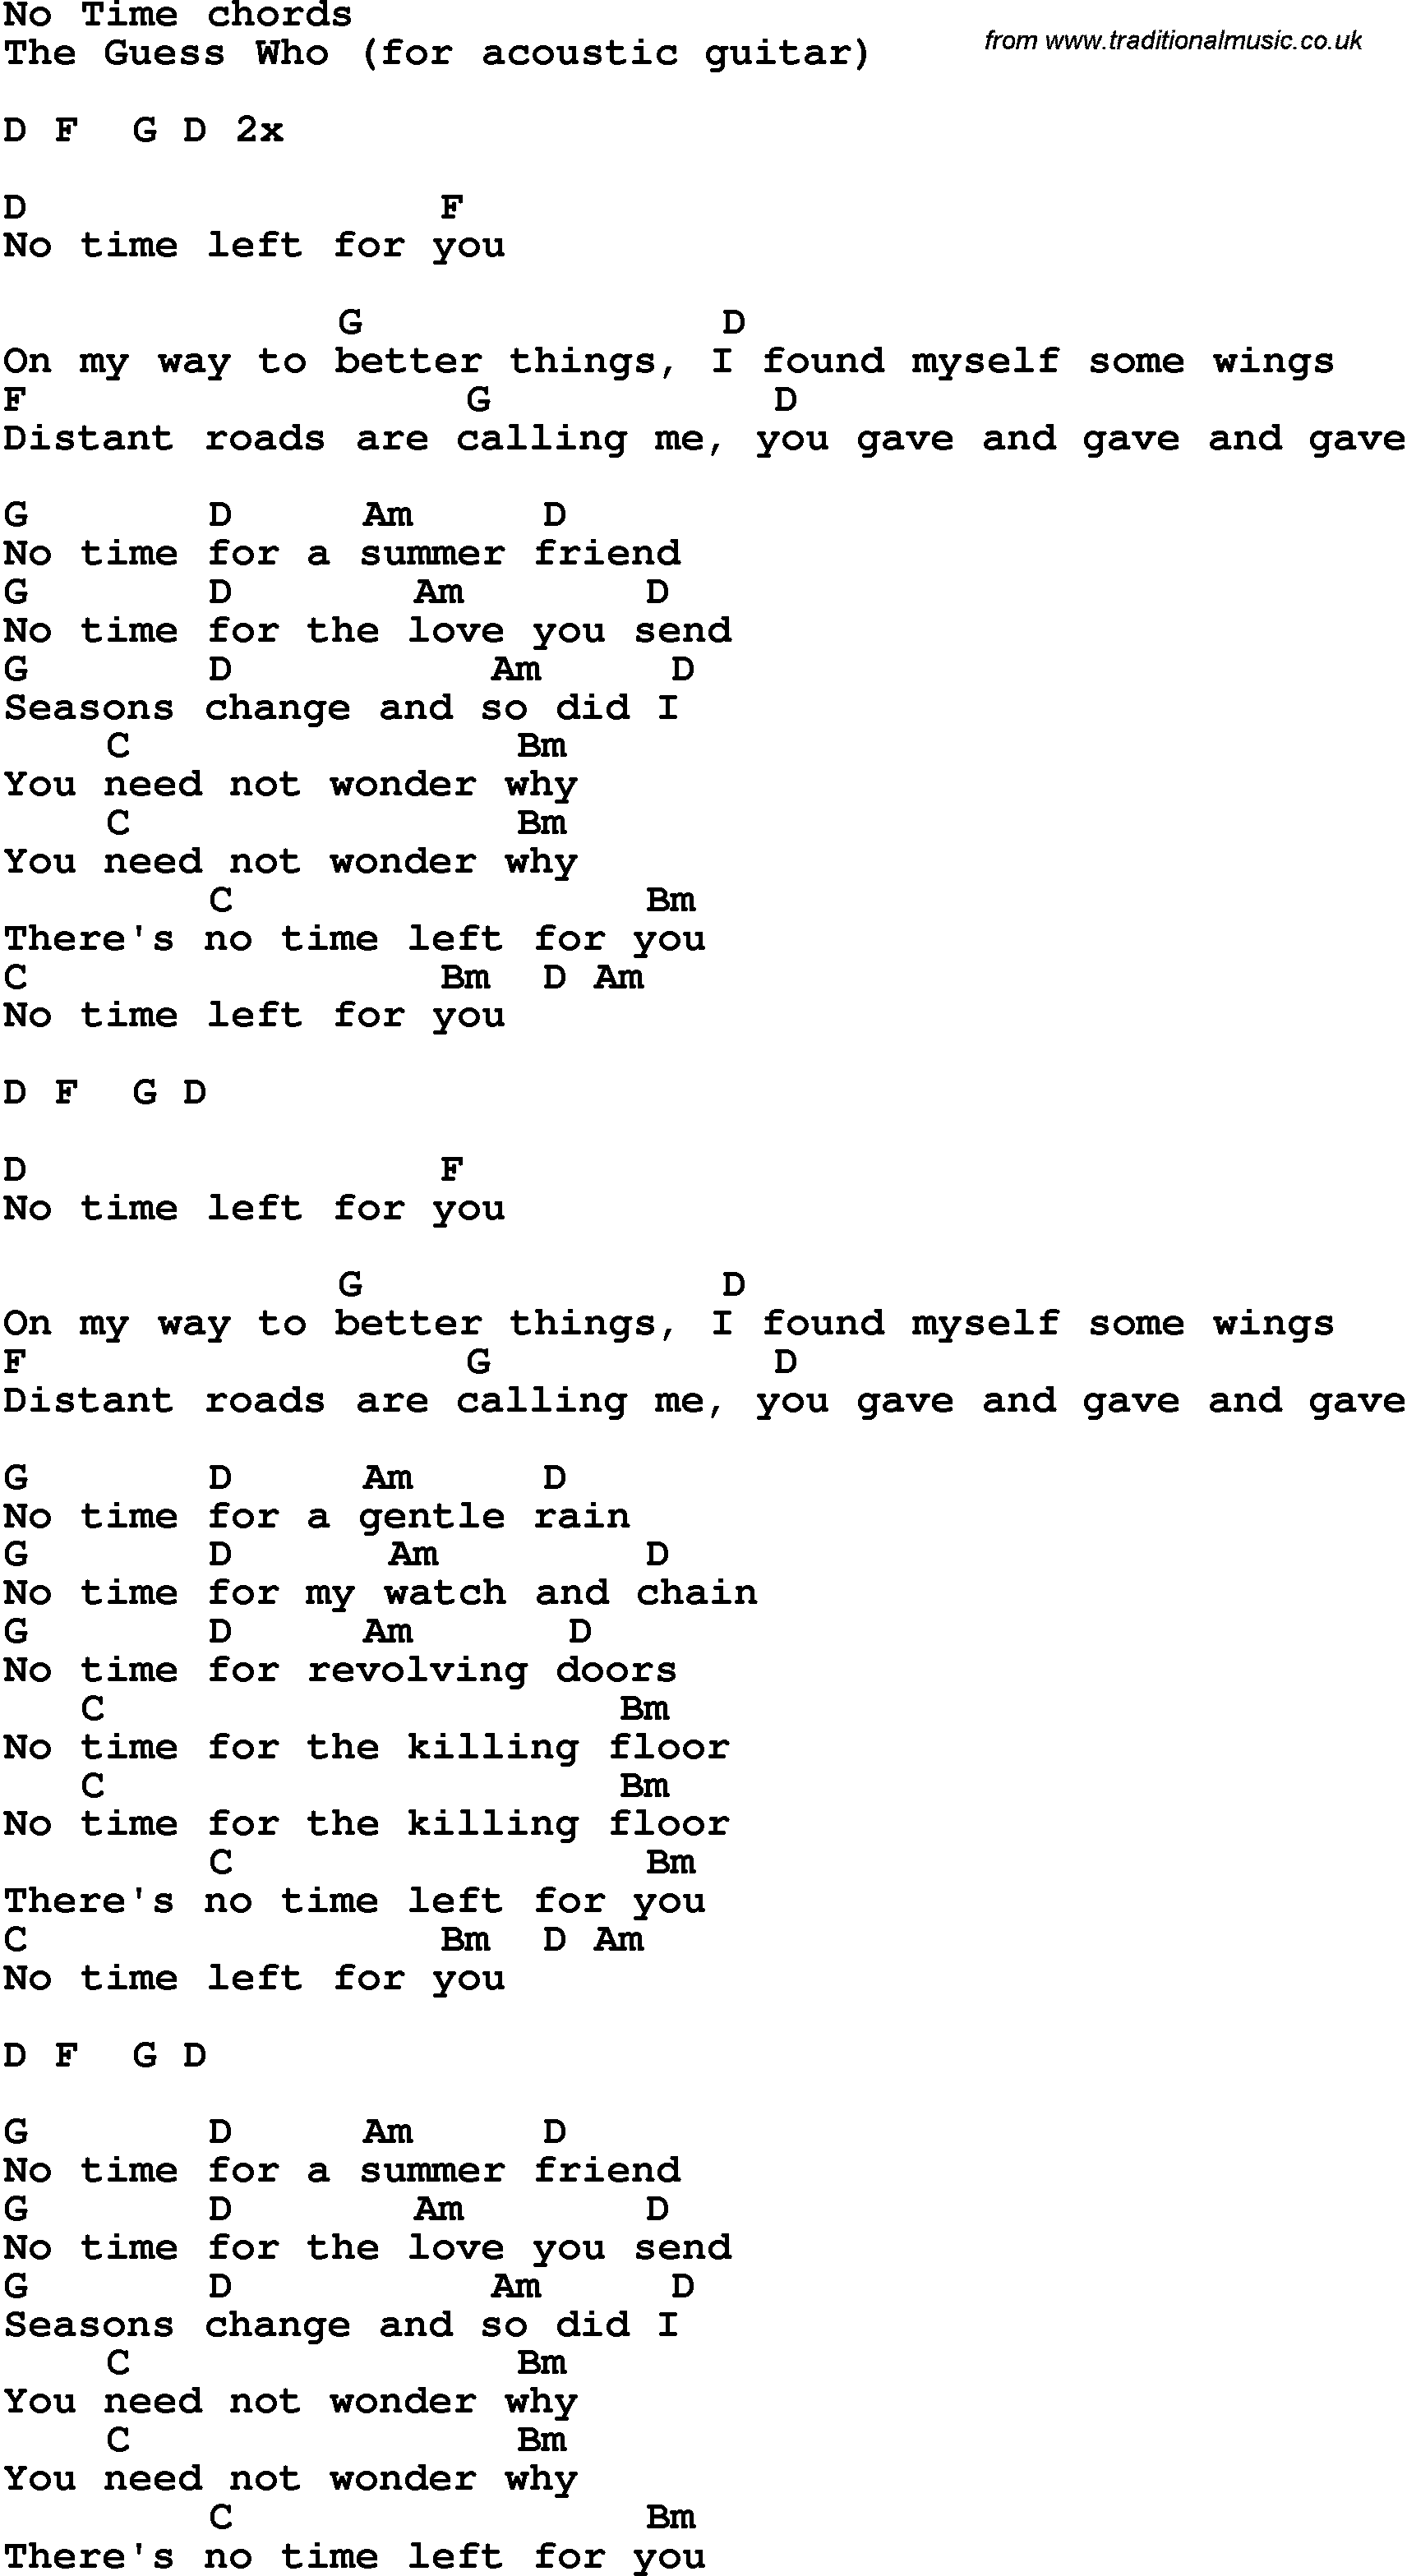 Song Lyrics with guitar chords for No Time